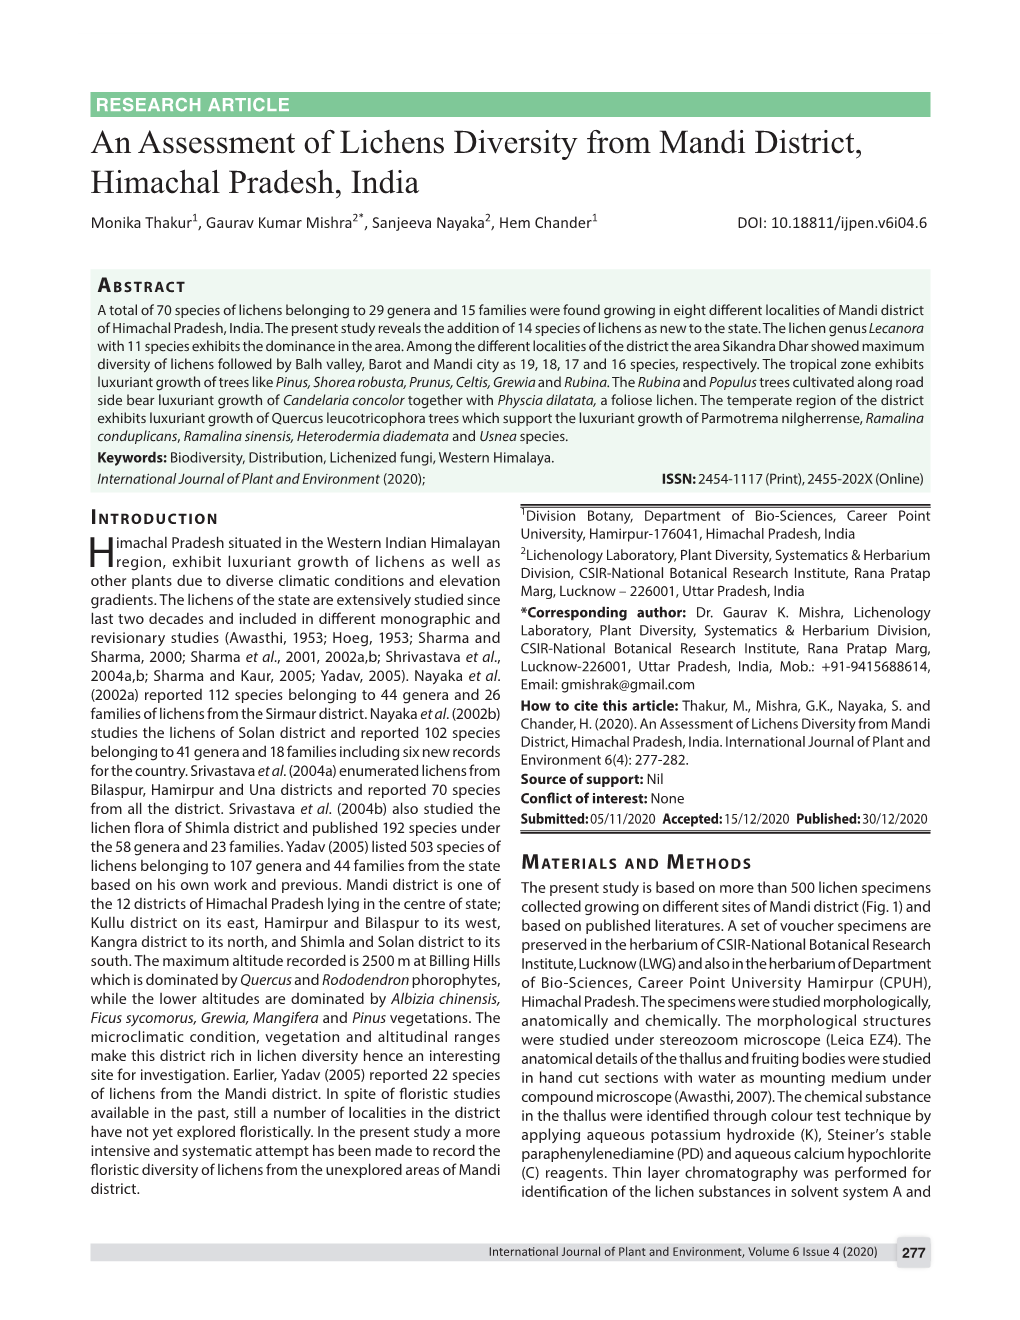 An Assessment of Lichens Diversity from Mandi District, Himachal